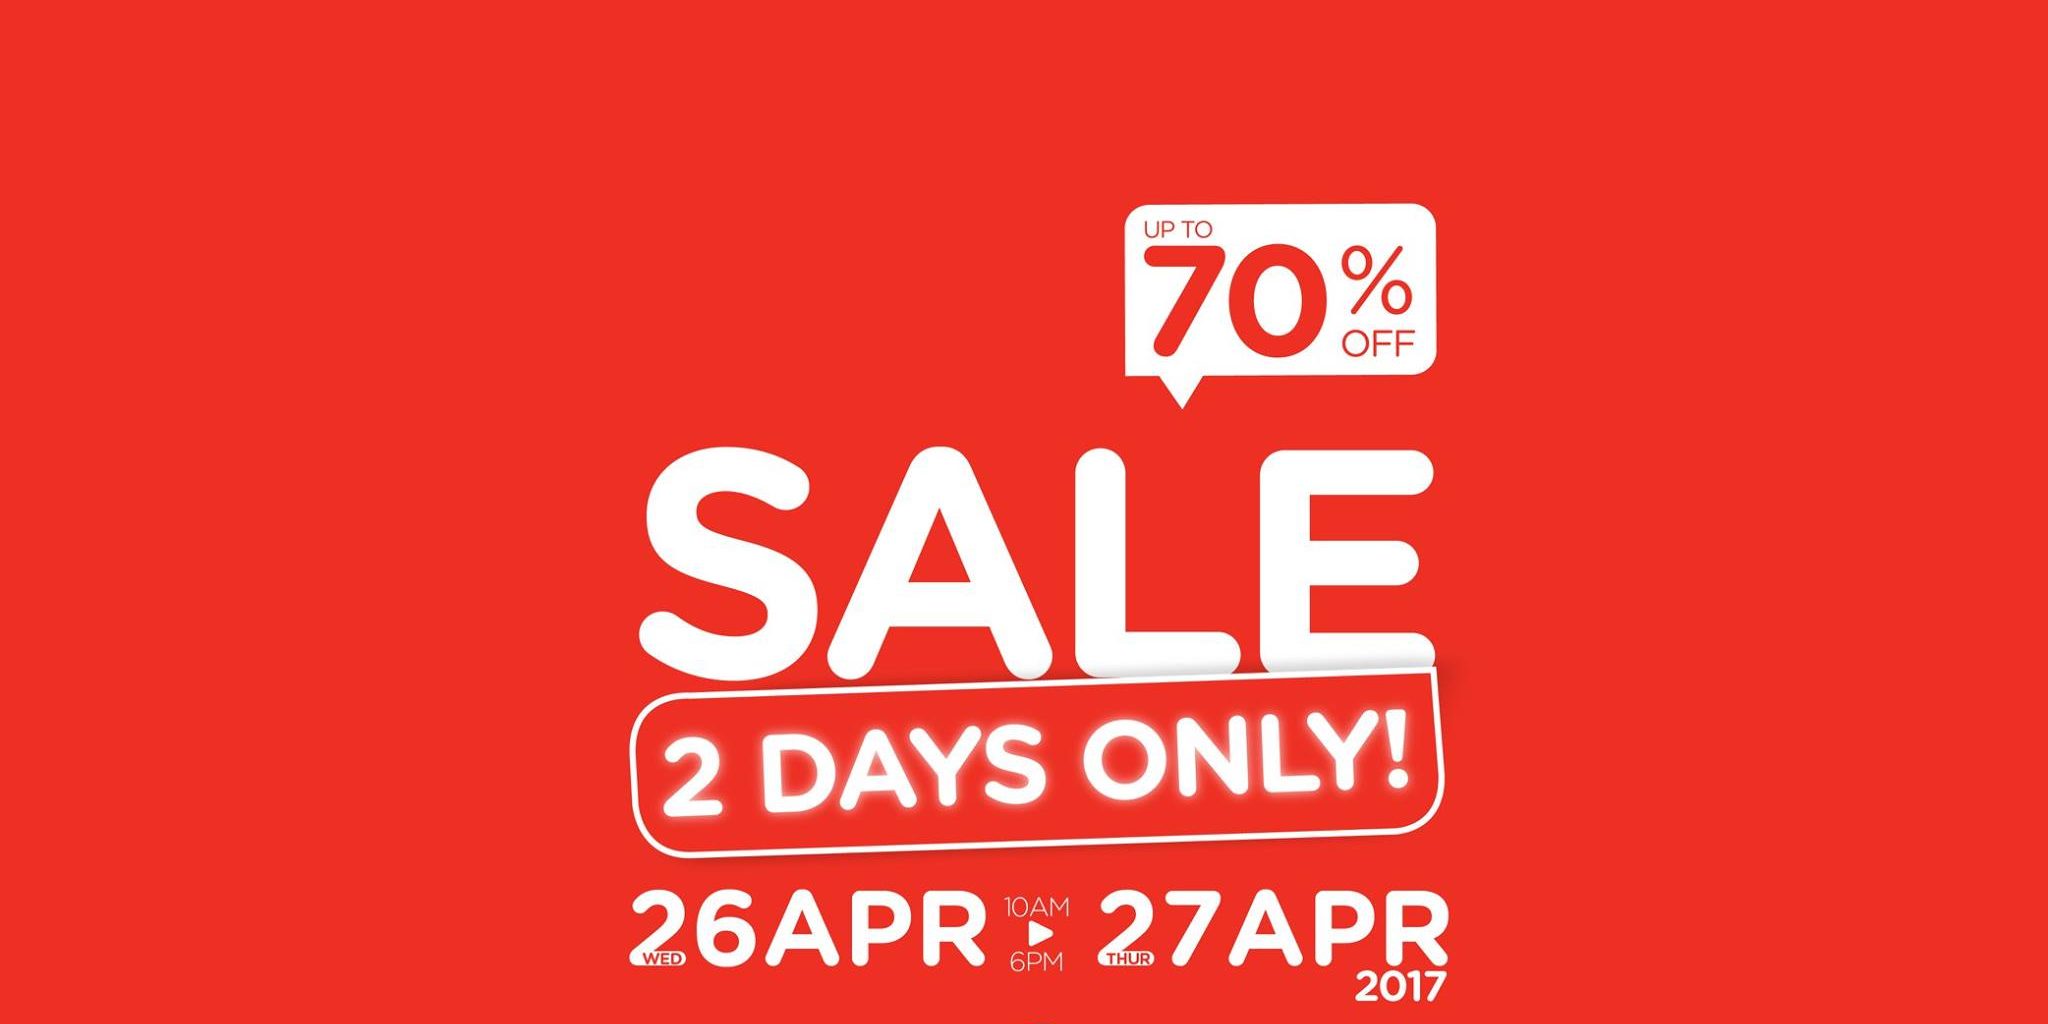 Watsons Singapore 2 Days Fuji Sale-rox Up to 70% Off Promotion 26-27 Apr 2017